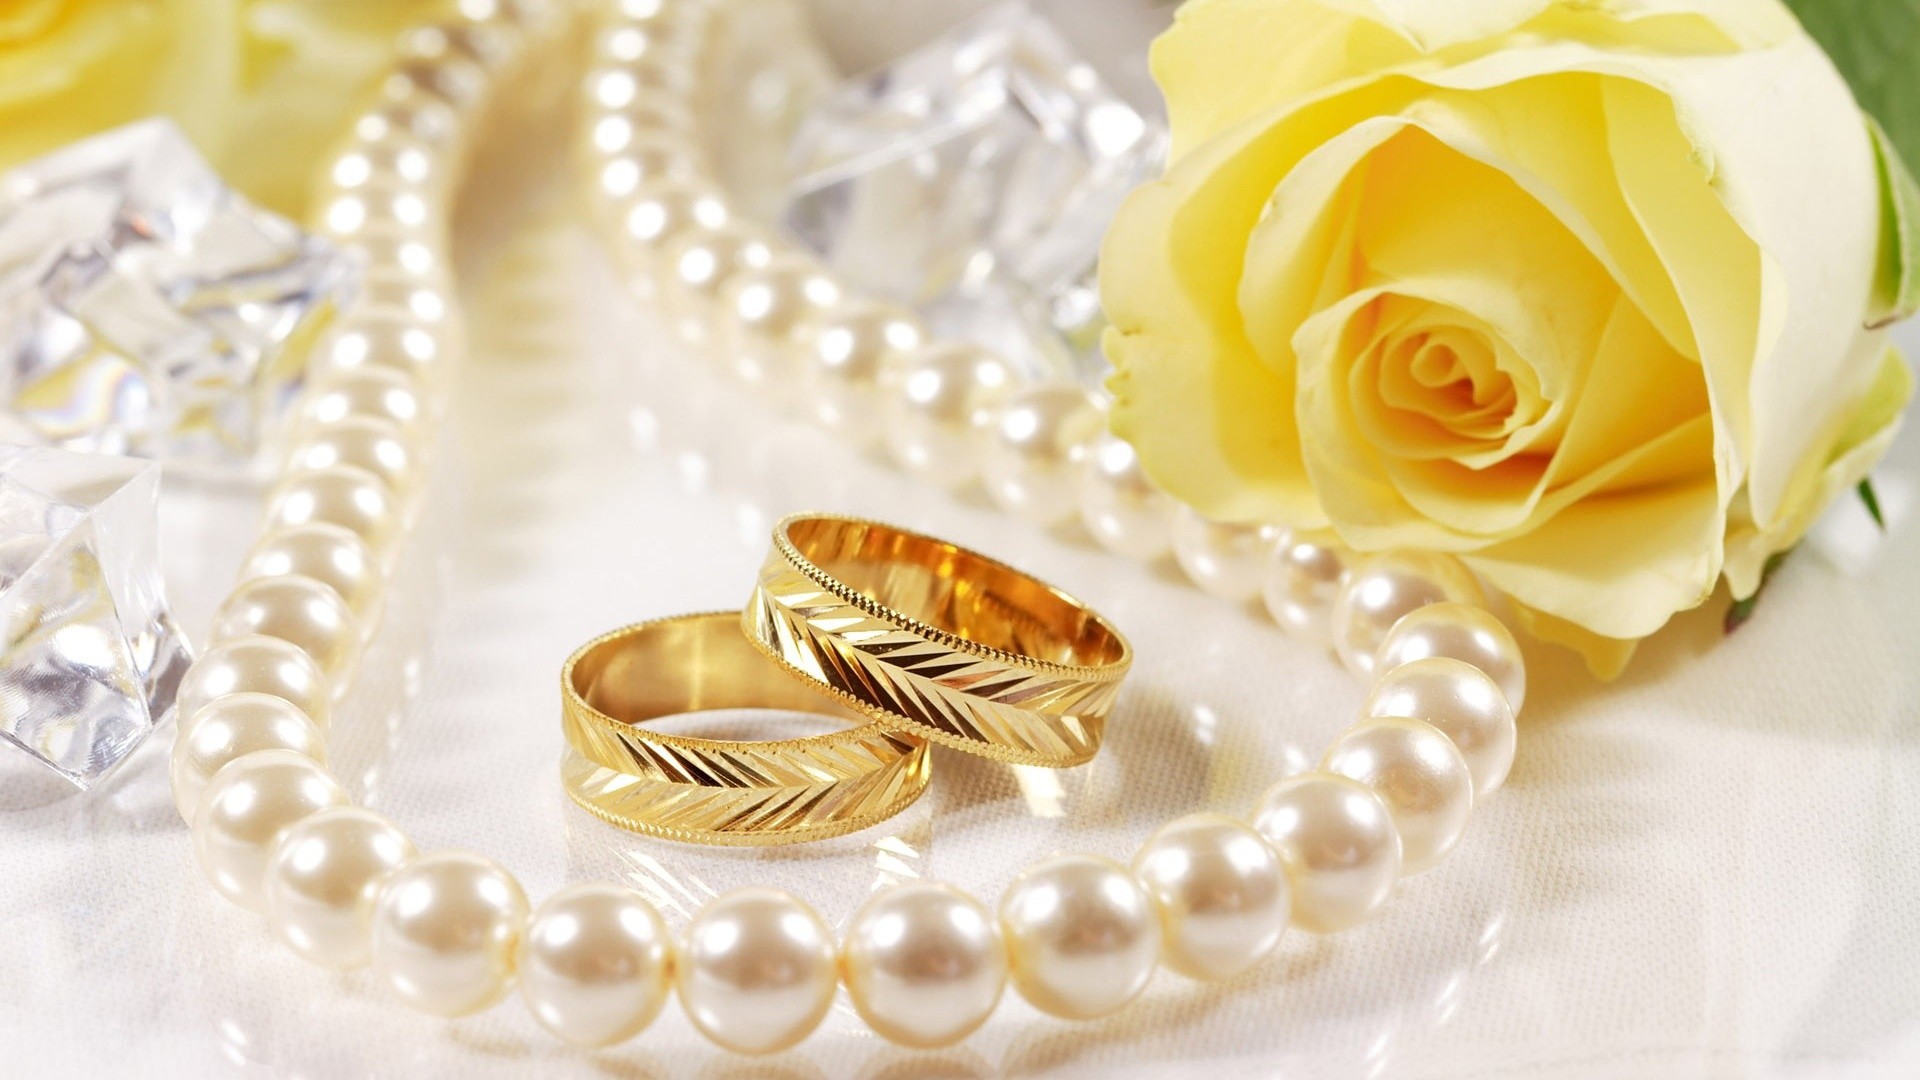 1920x1080 Wedding rings and yellow rose #wallpapers